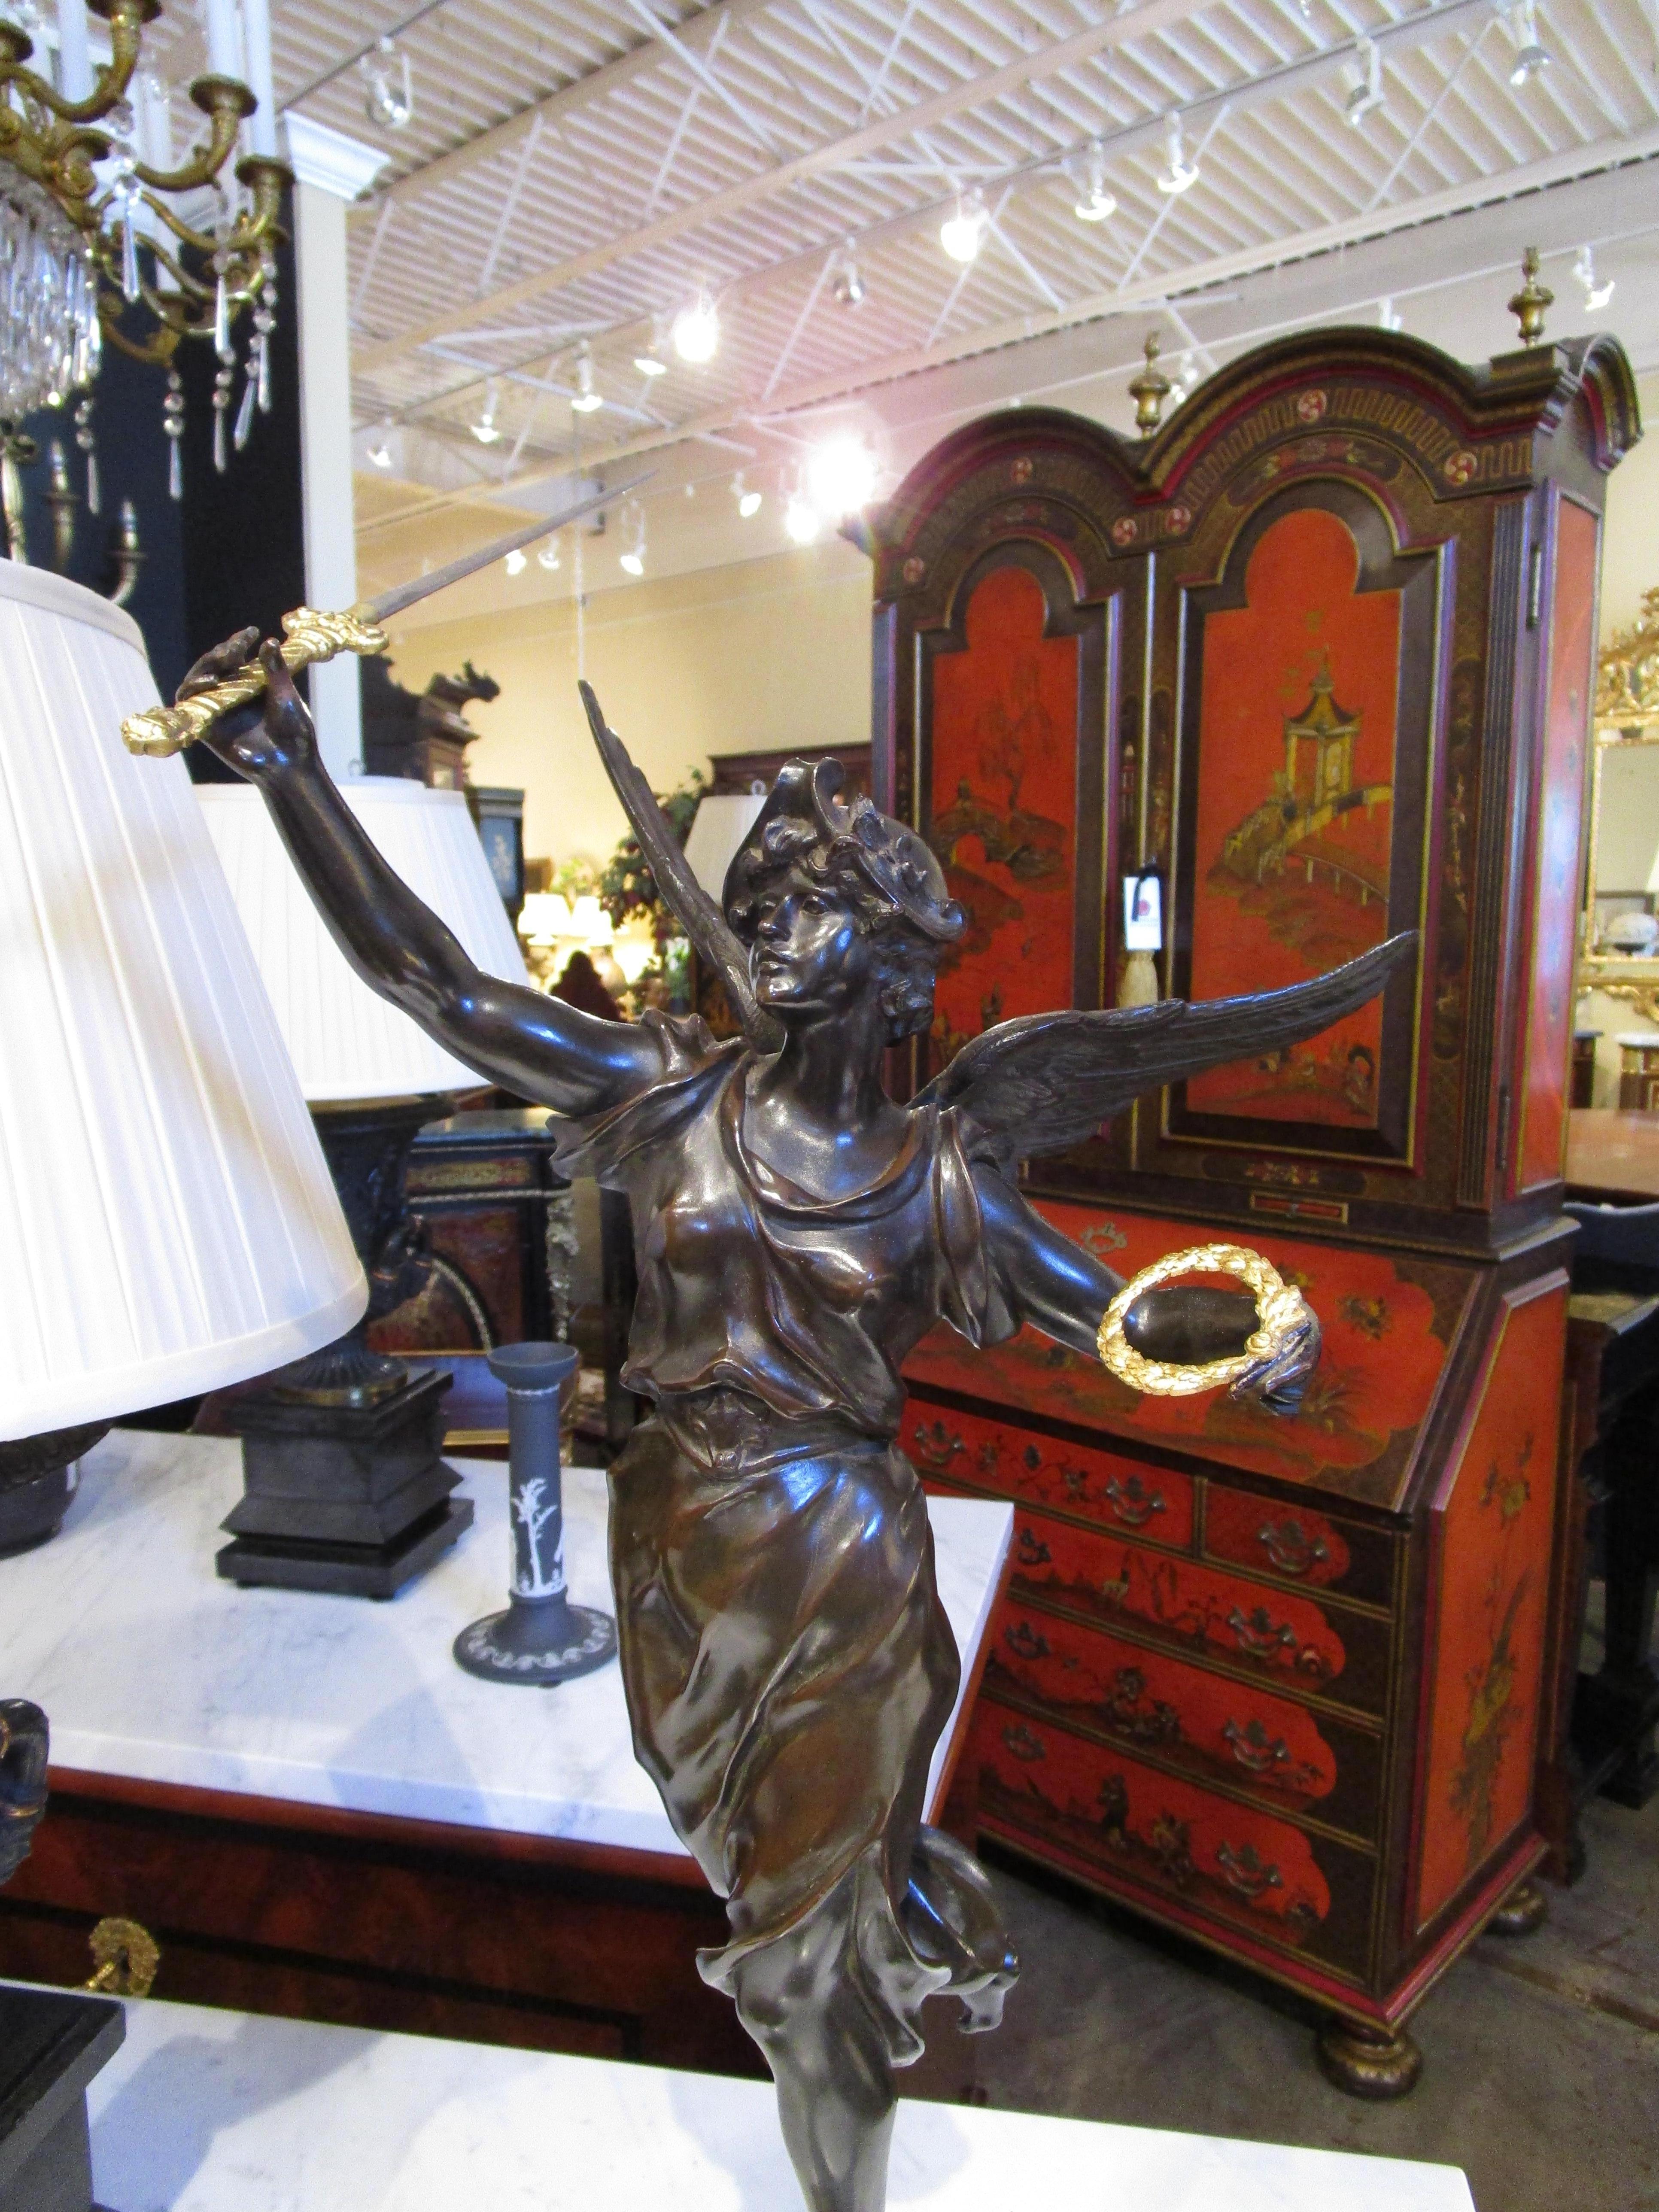 A fine 19th century French bronze depicting Victory. Signed with beautiful details and parcel gilt sword and wreath.